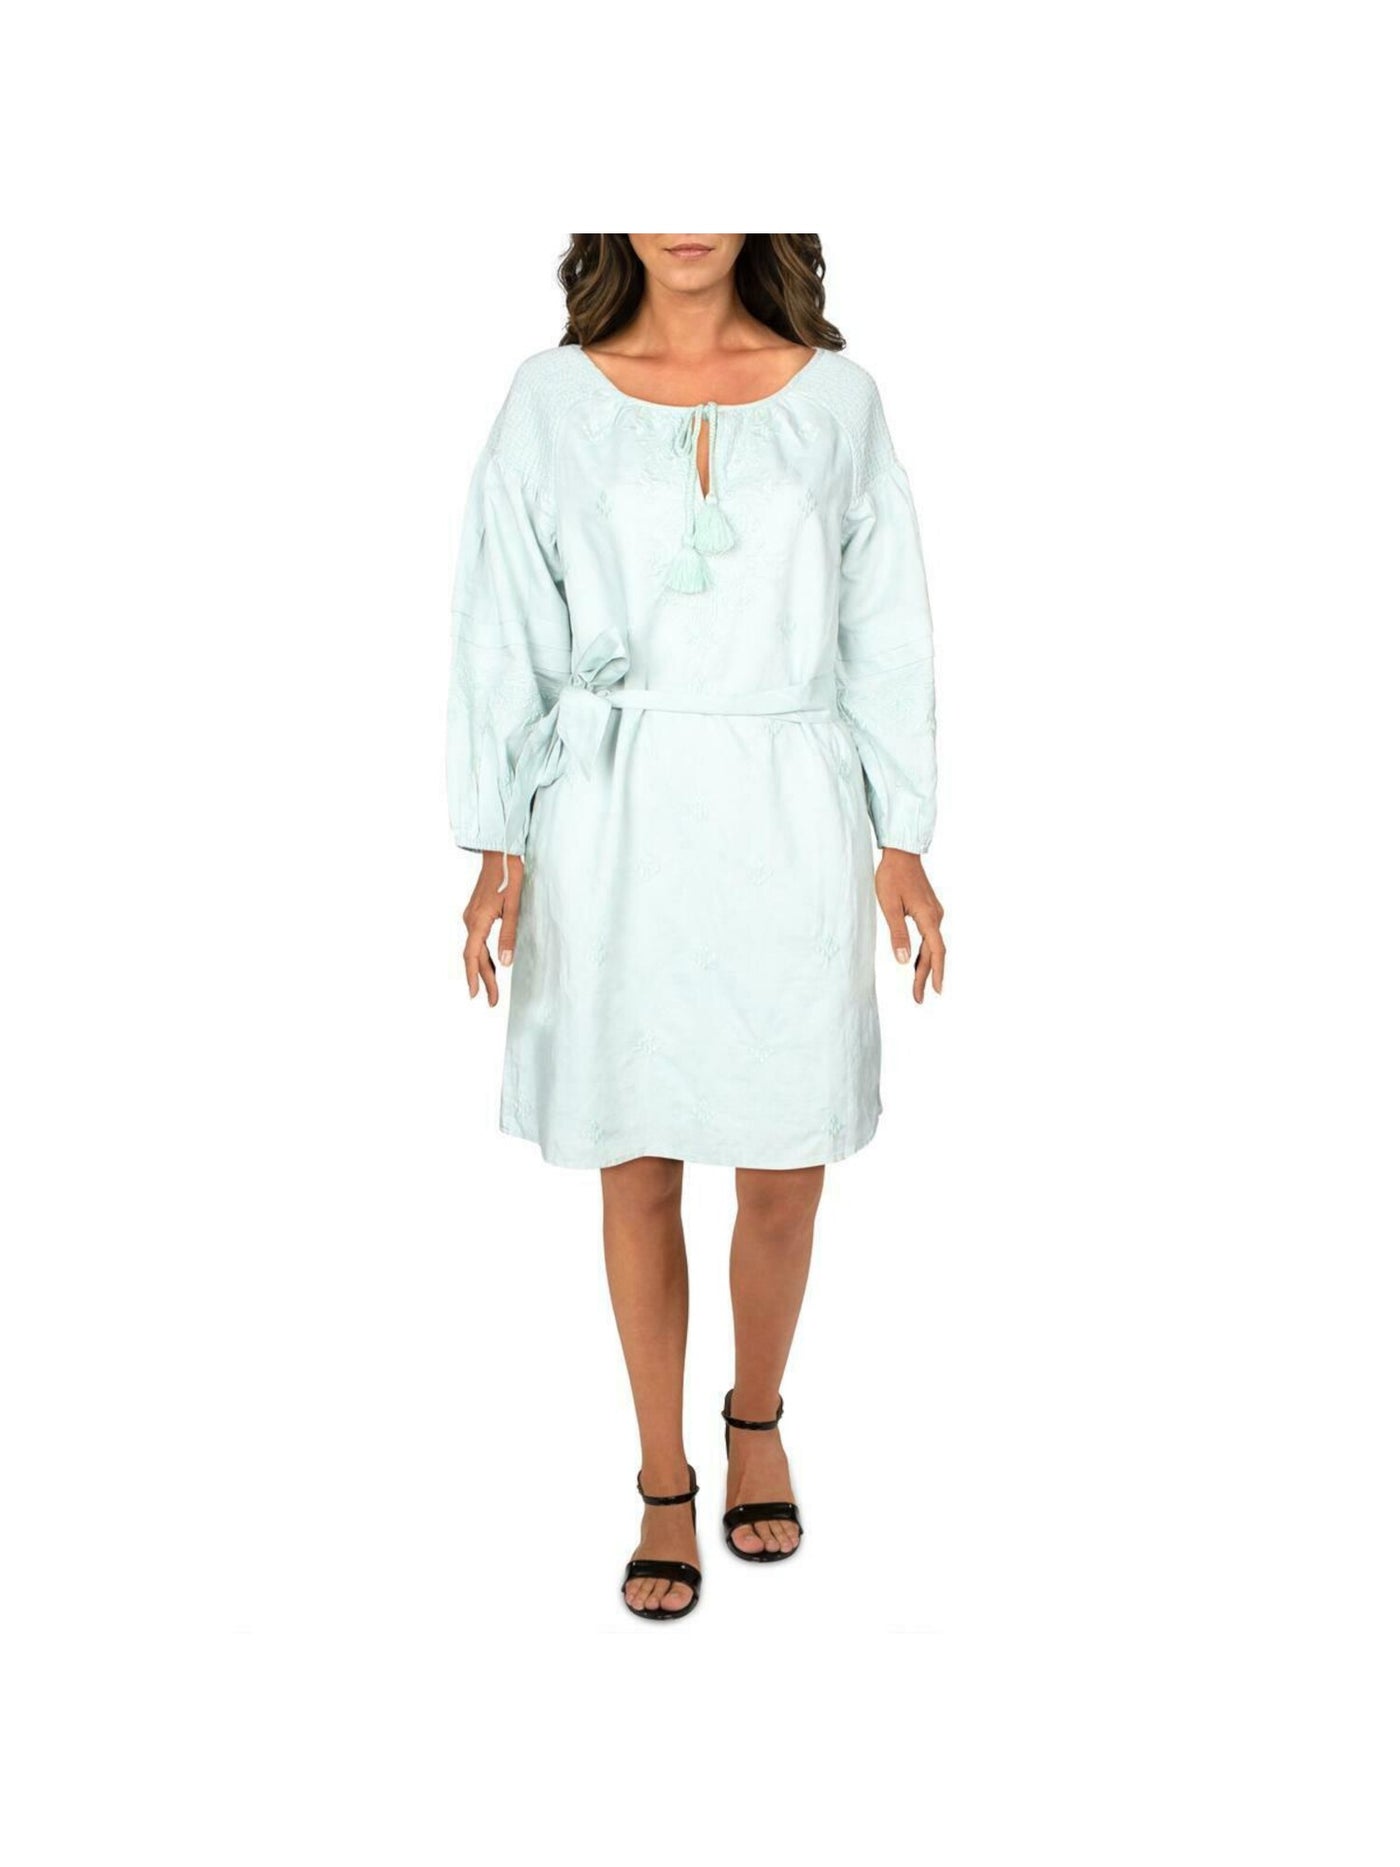 INC Womens Green Belted Pocketed Pocketed Bell Sleeve Tie Neck Above The Knee Fit + Flare Dress M